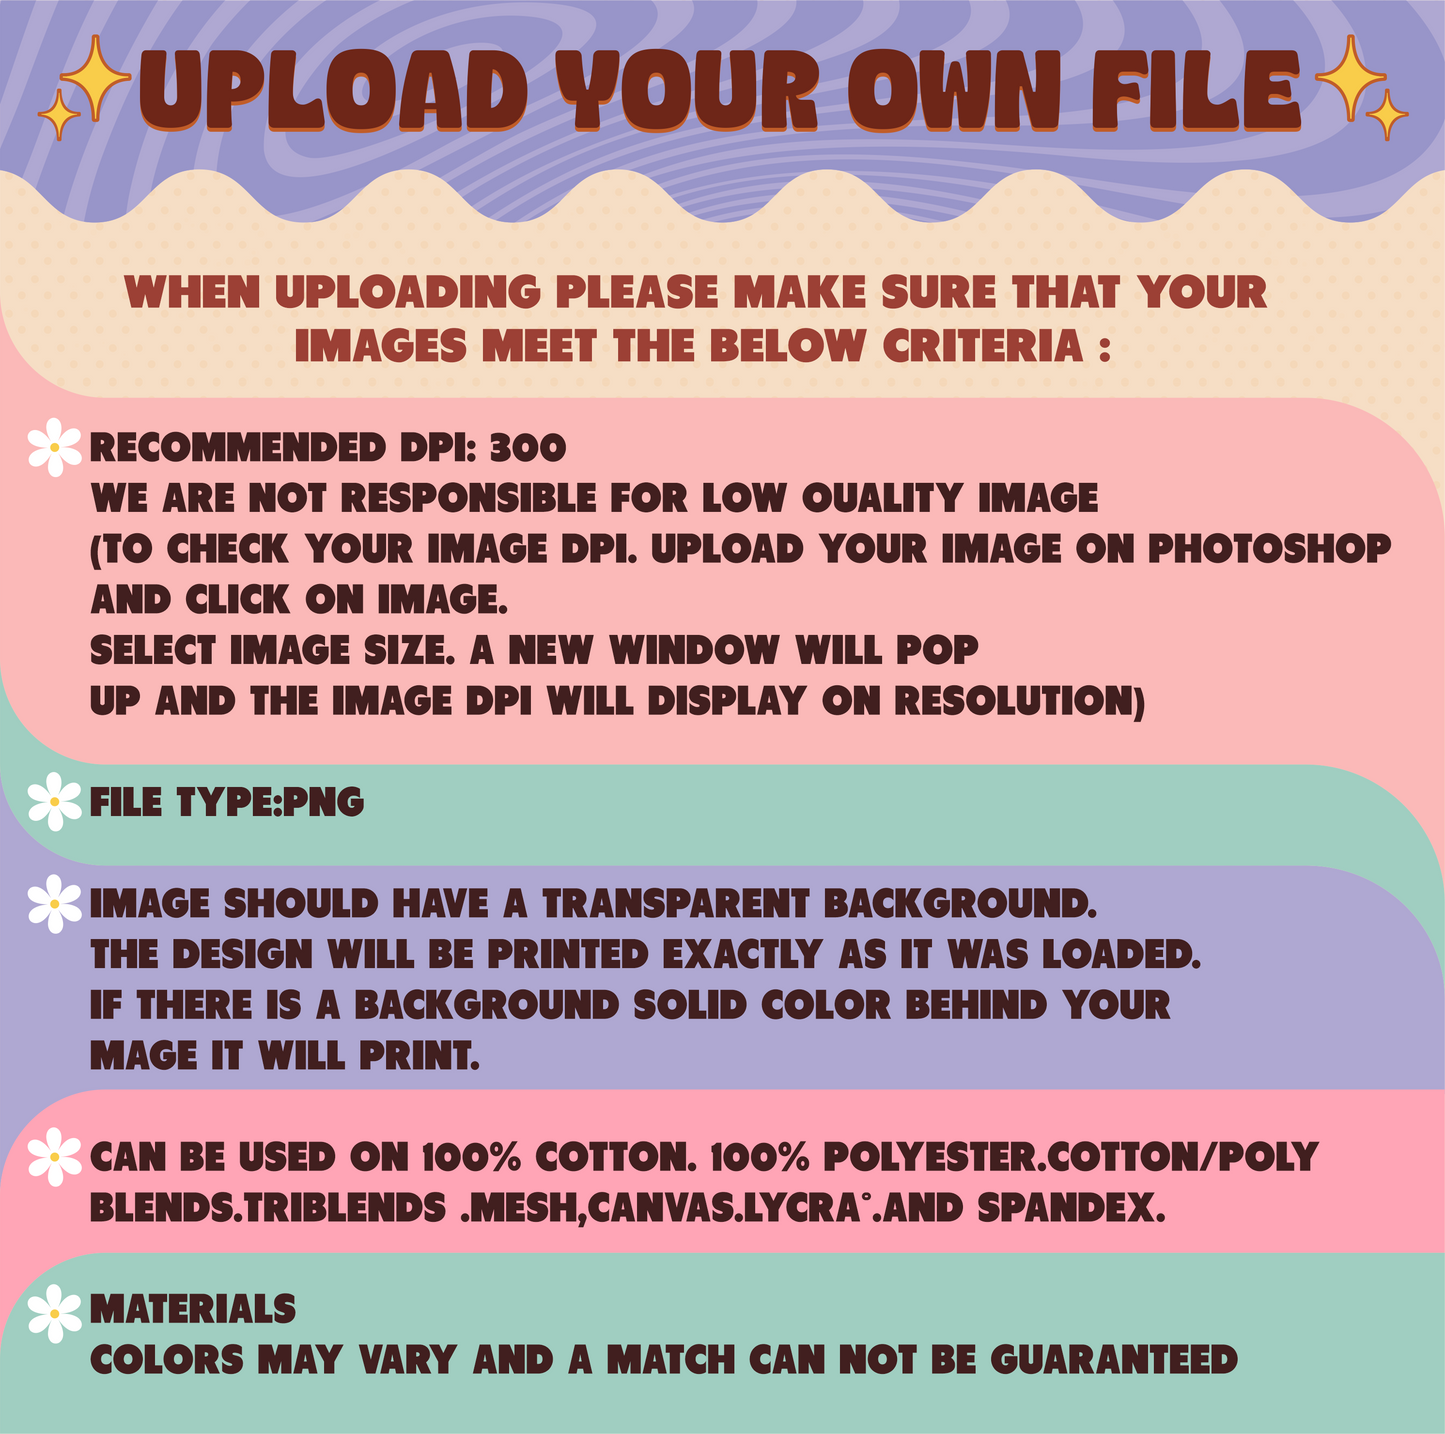 UPLOAD YOUR OWN FILES-DTF